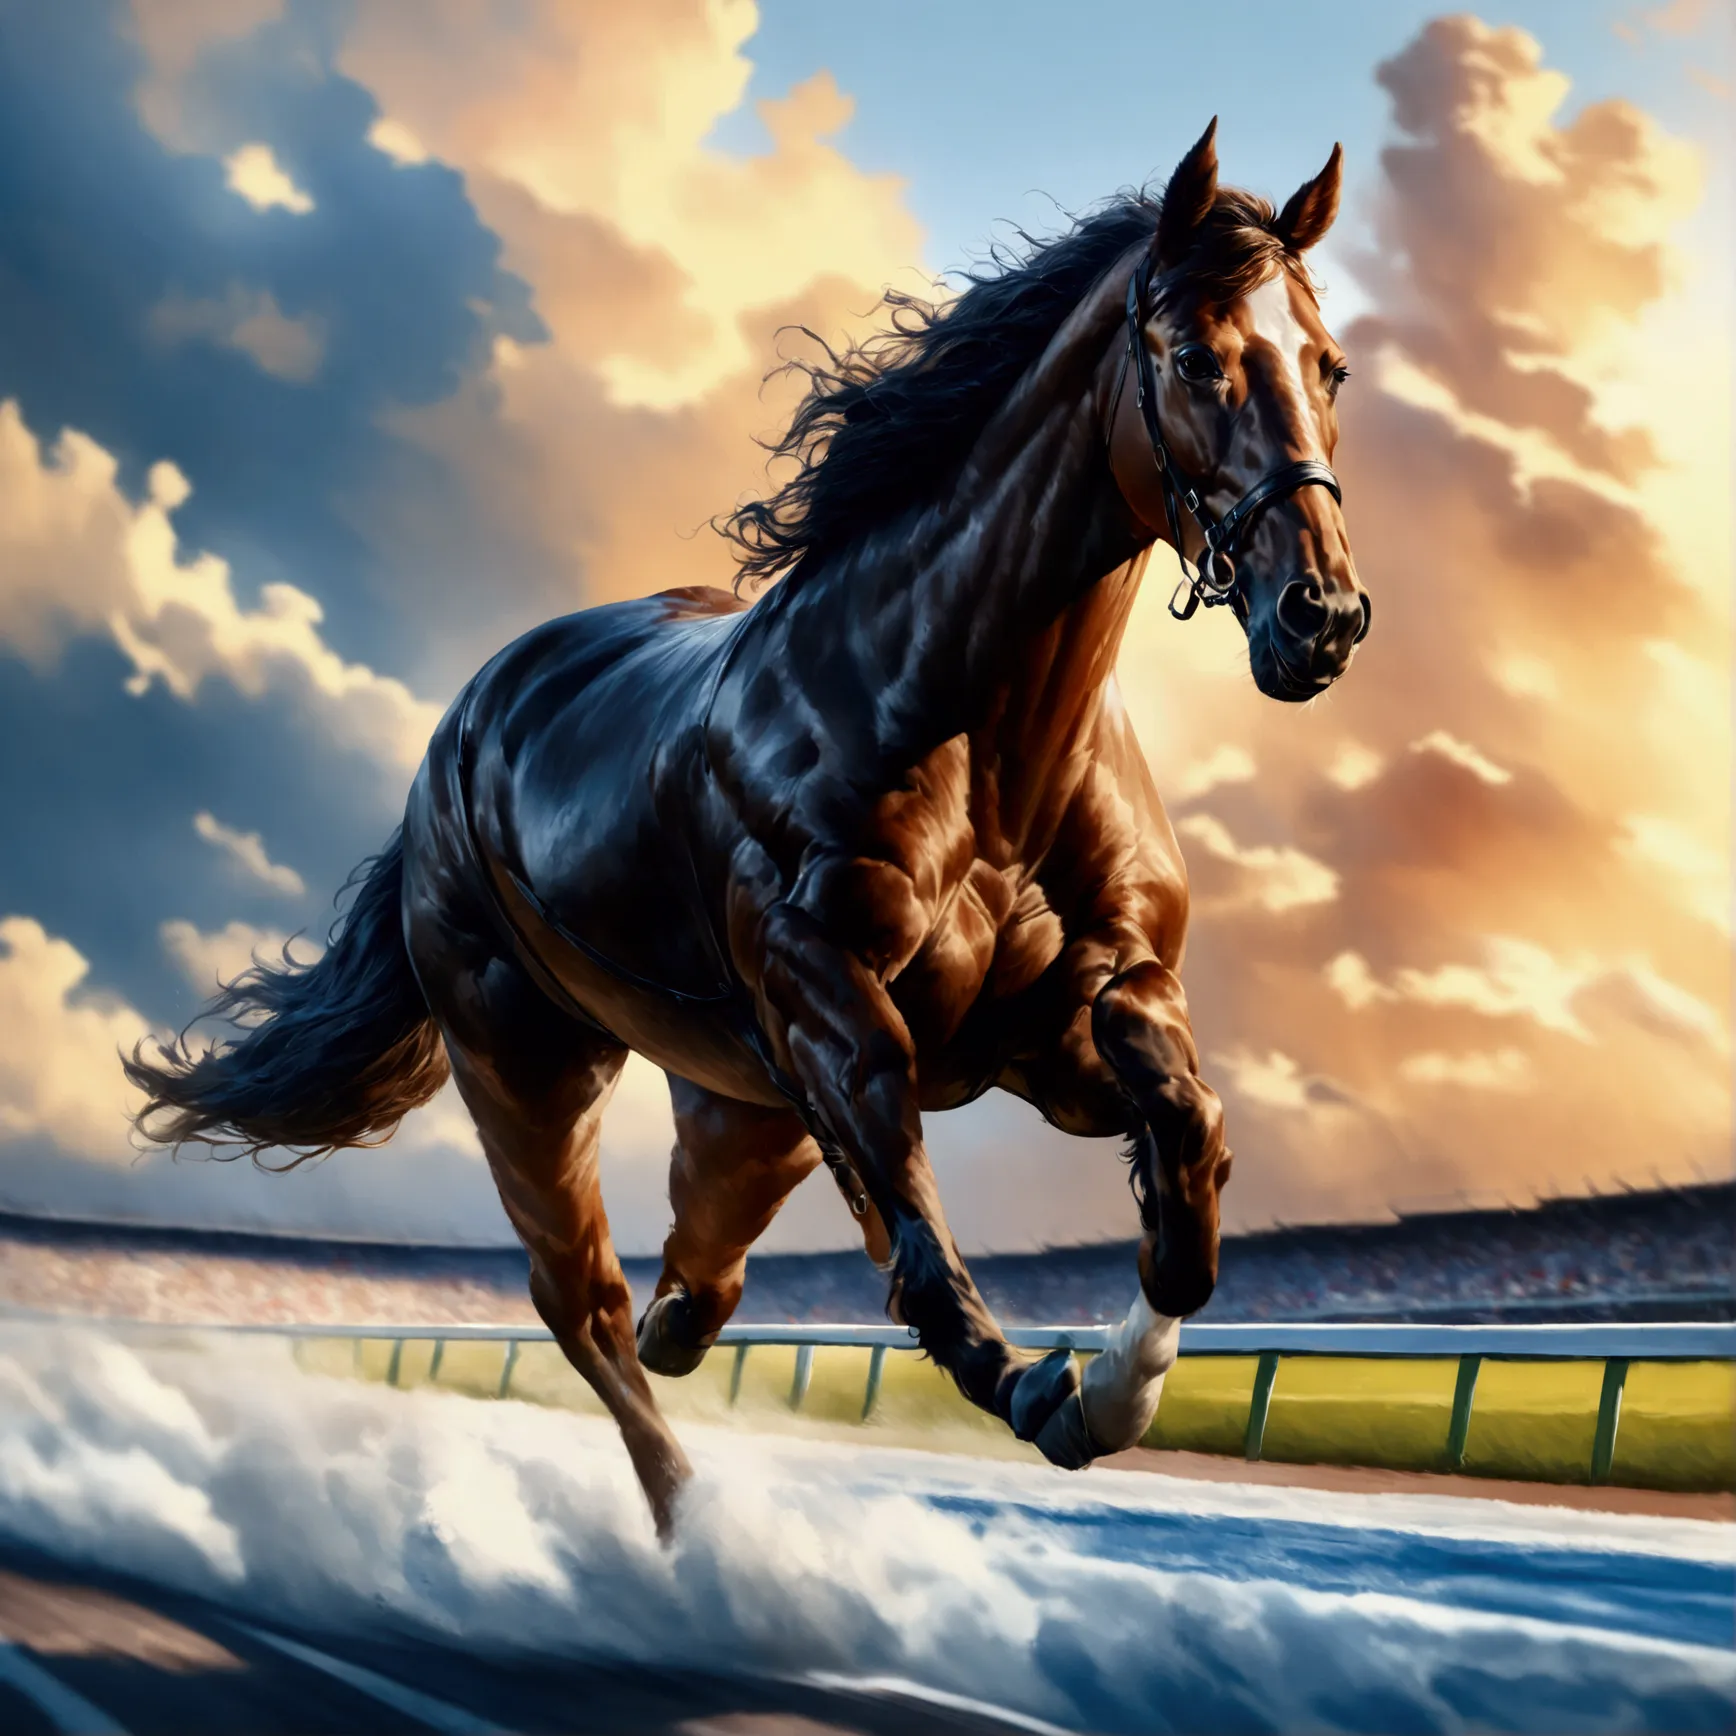 A majestic horse galloping freely on a race course, its powerful muscles rippling beneath a coat of silky hair, (best quality,4k...